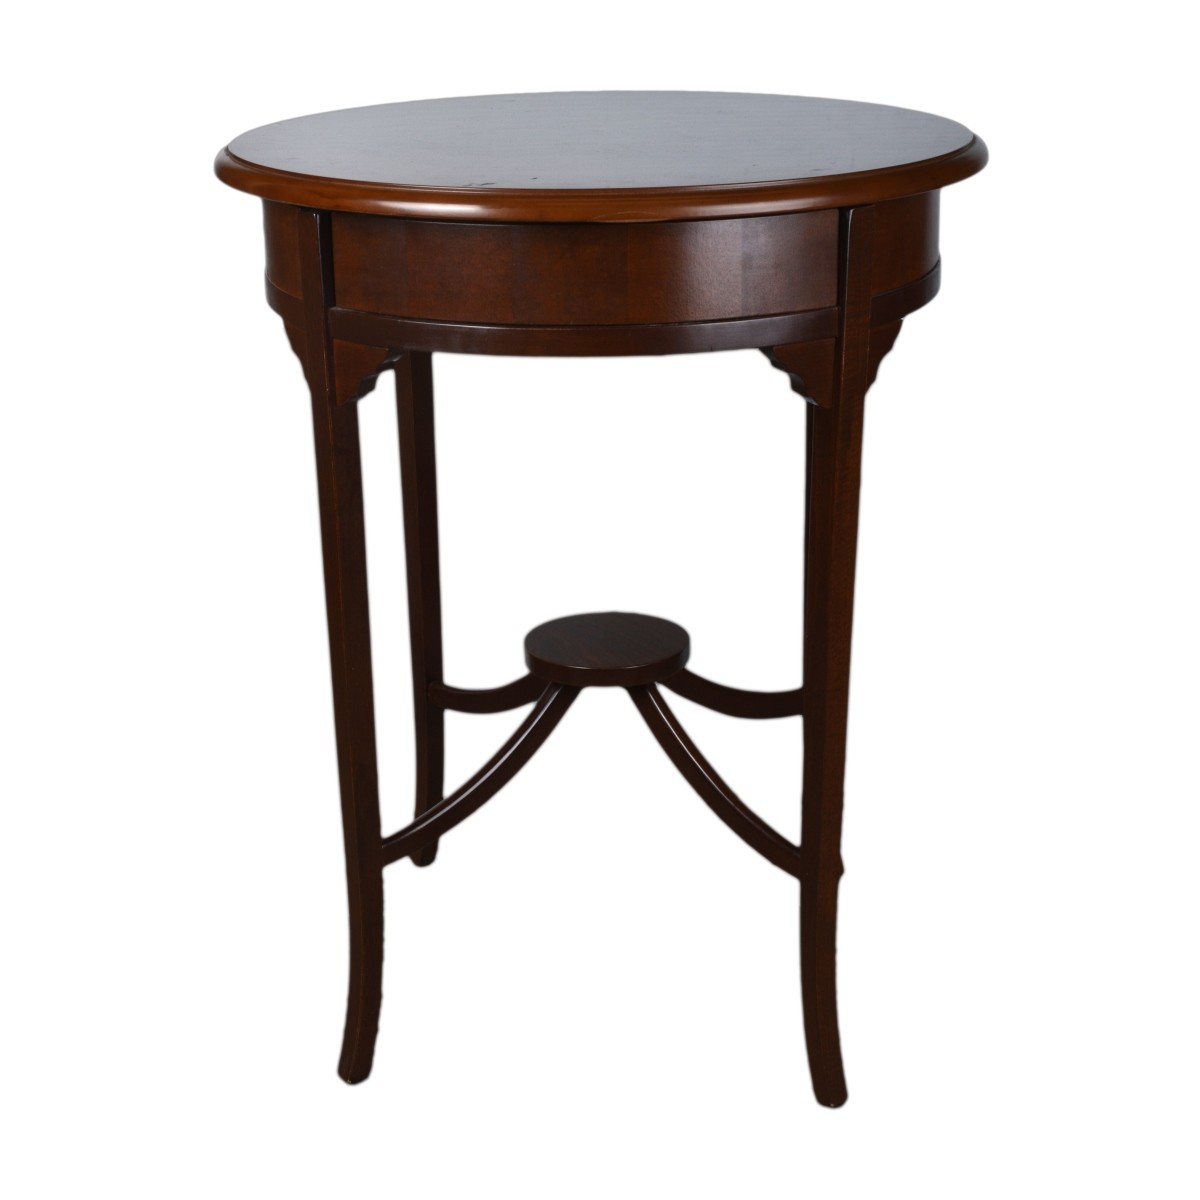 Vintage Inlaid Wooden Round Table